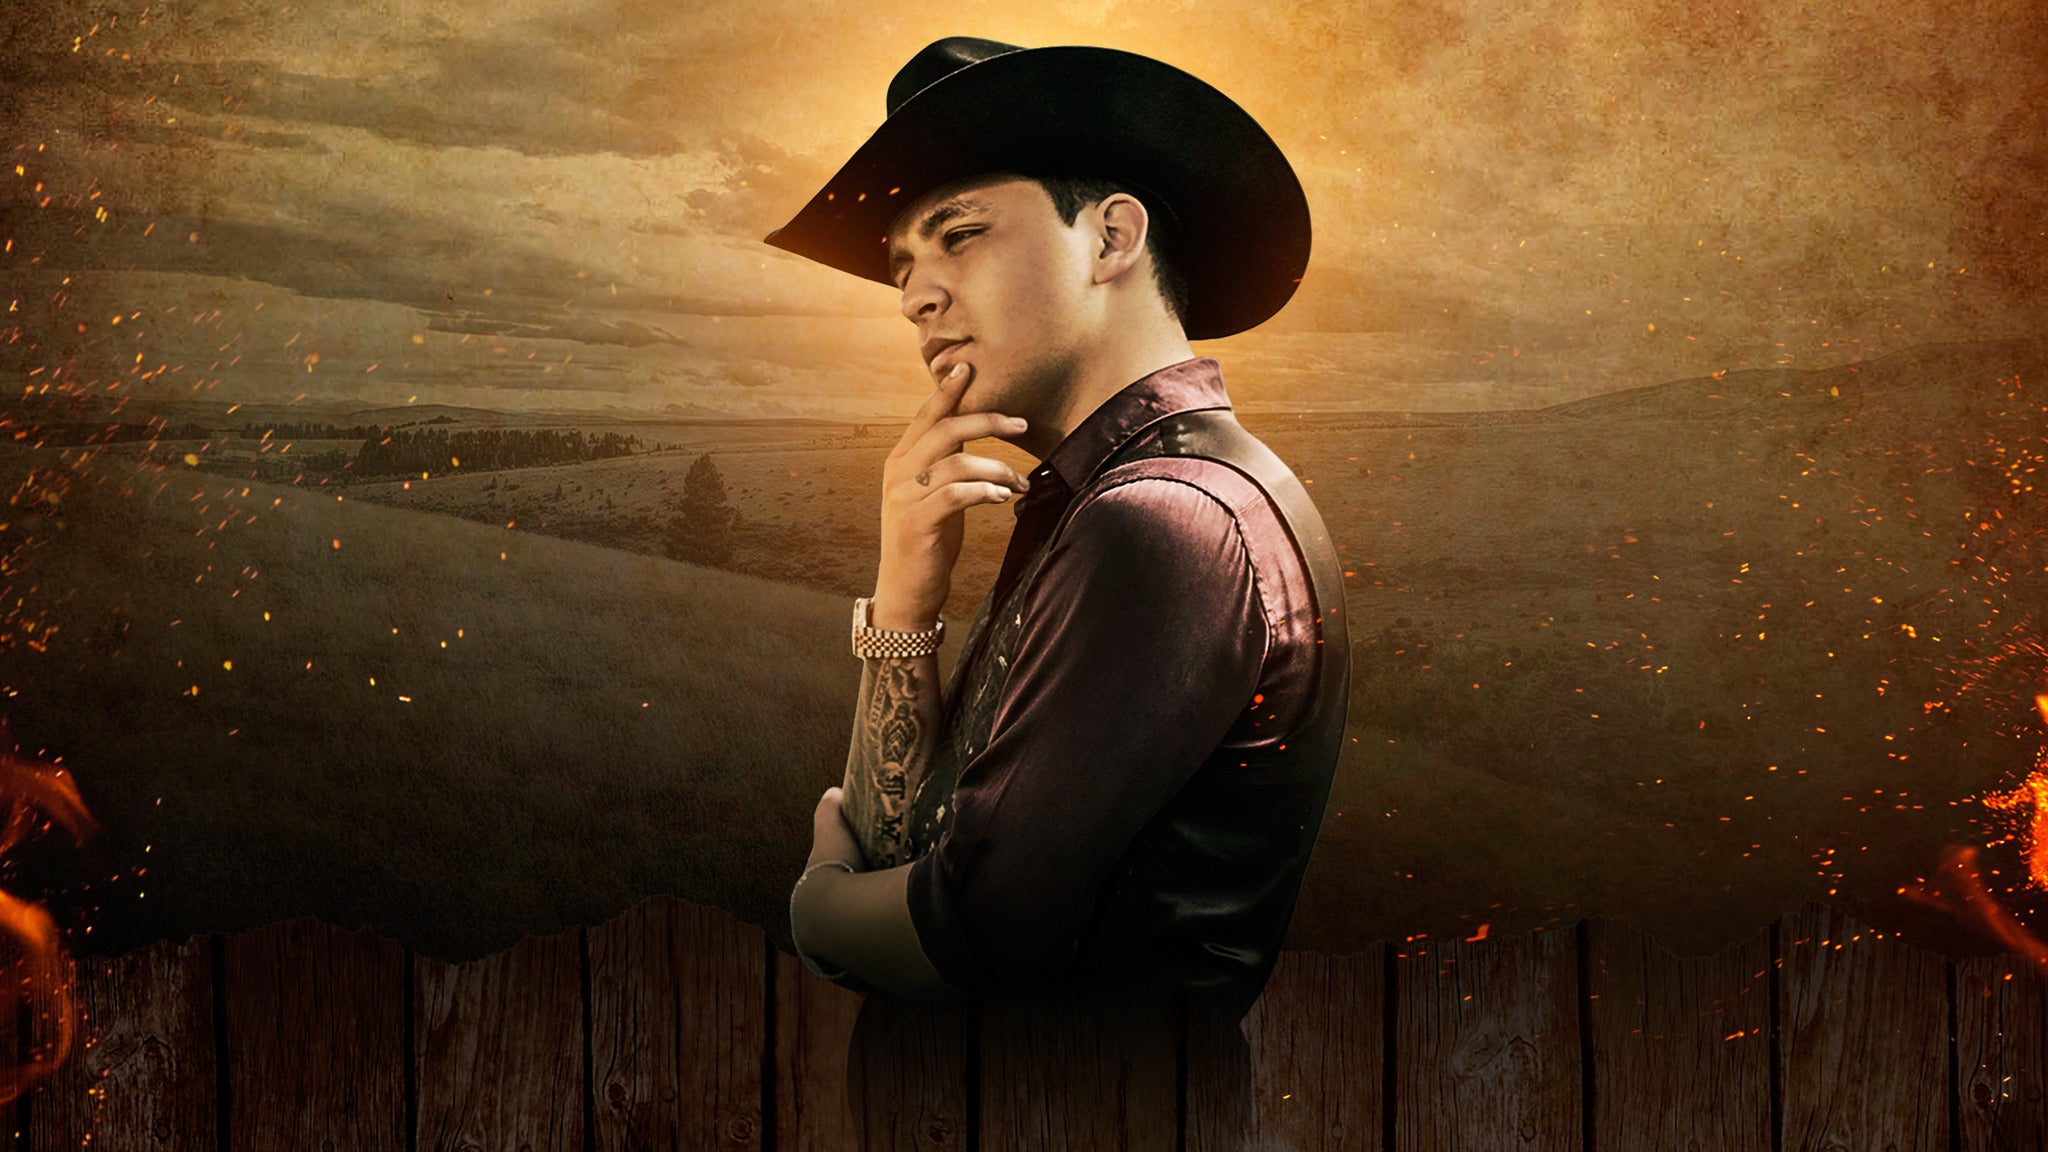 Christian Nodal - Ahora - SOLD OUT! in Hollywood promo photo for Official Platinum presale offer code